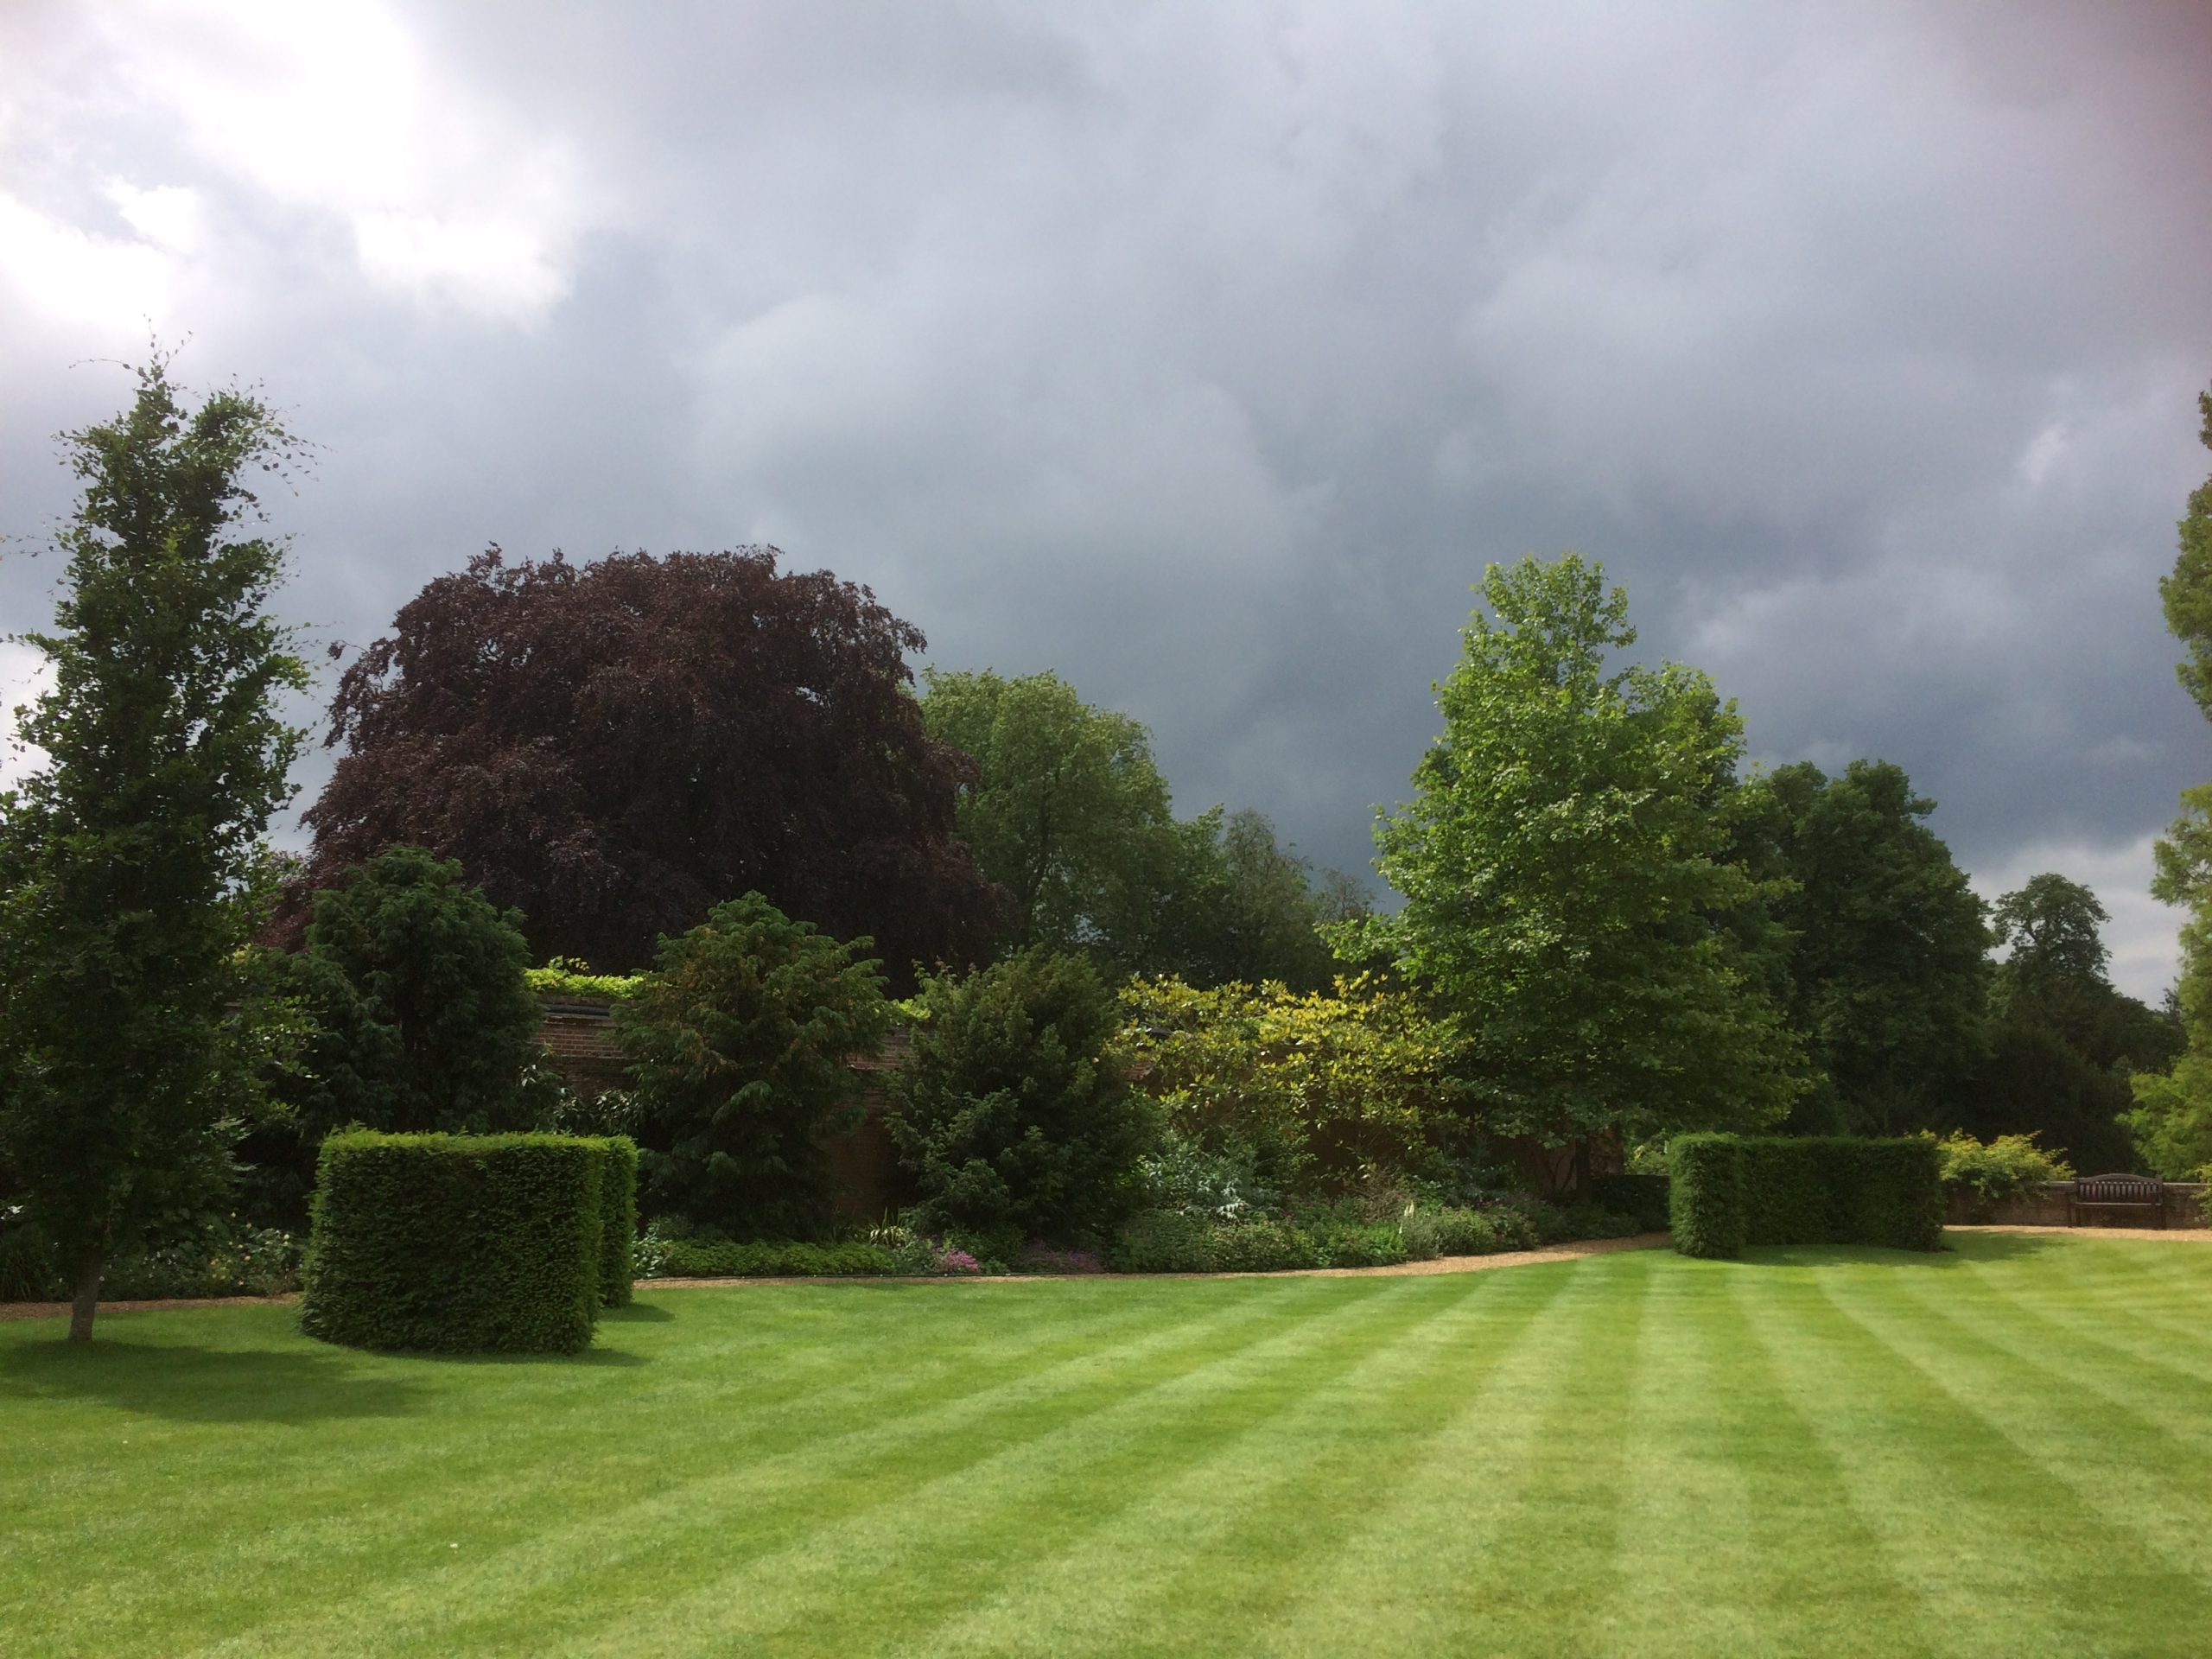 View down the Fellows' Garden towards the river. The lawn is green and striped and storm clouds are gathering overhead.